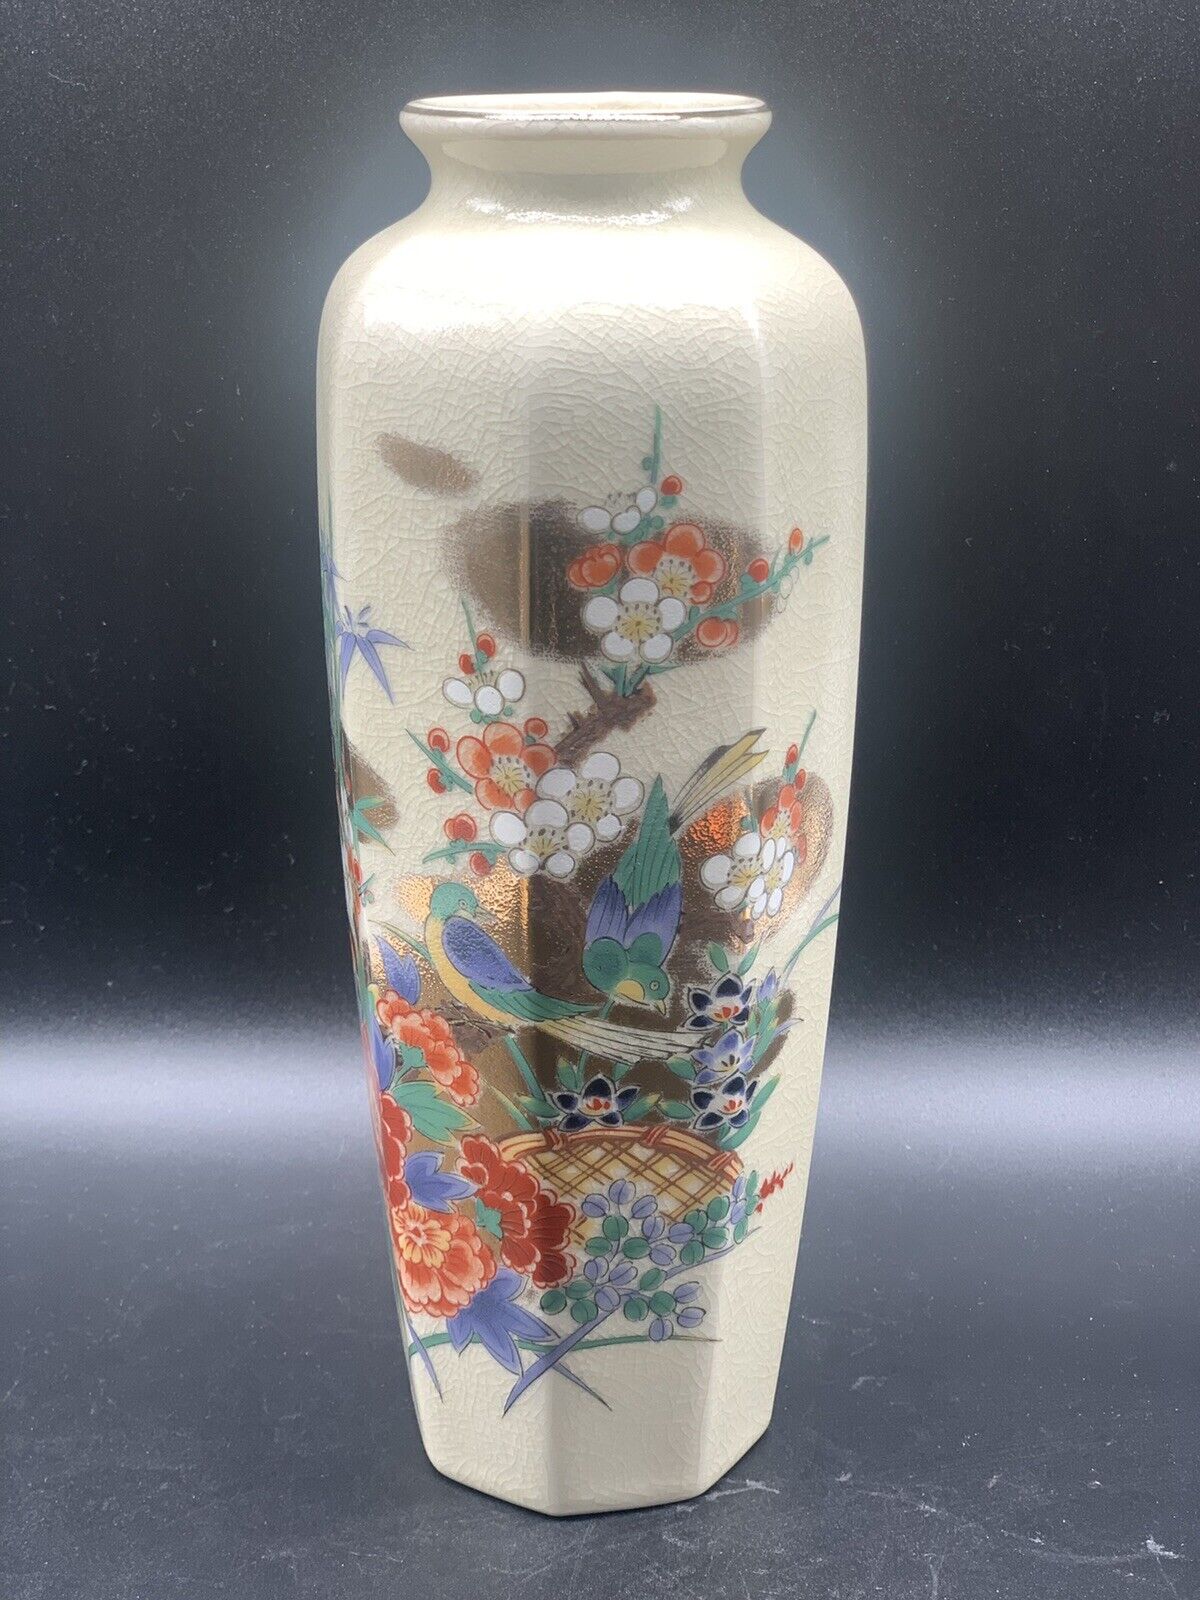 The Orient Vintage Vase Birds Hand Decorated Made in Japan 11x5